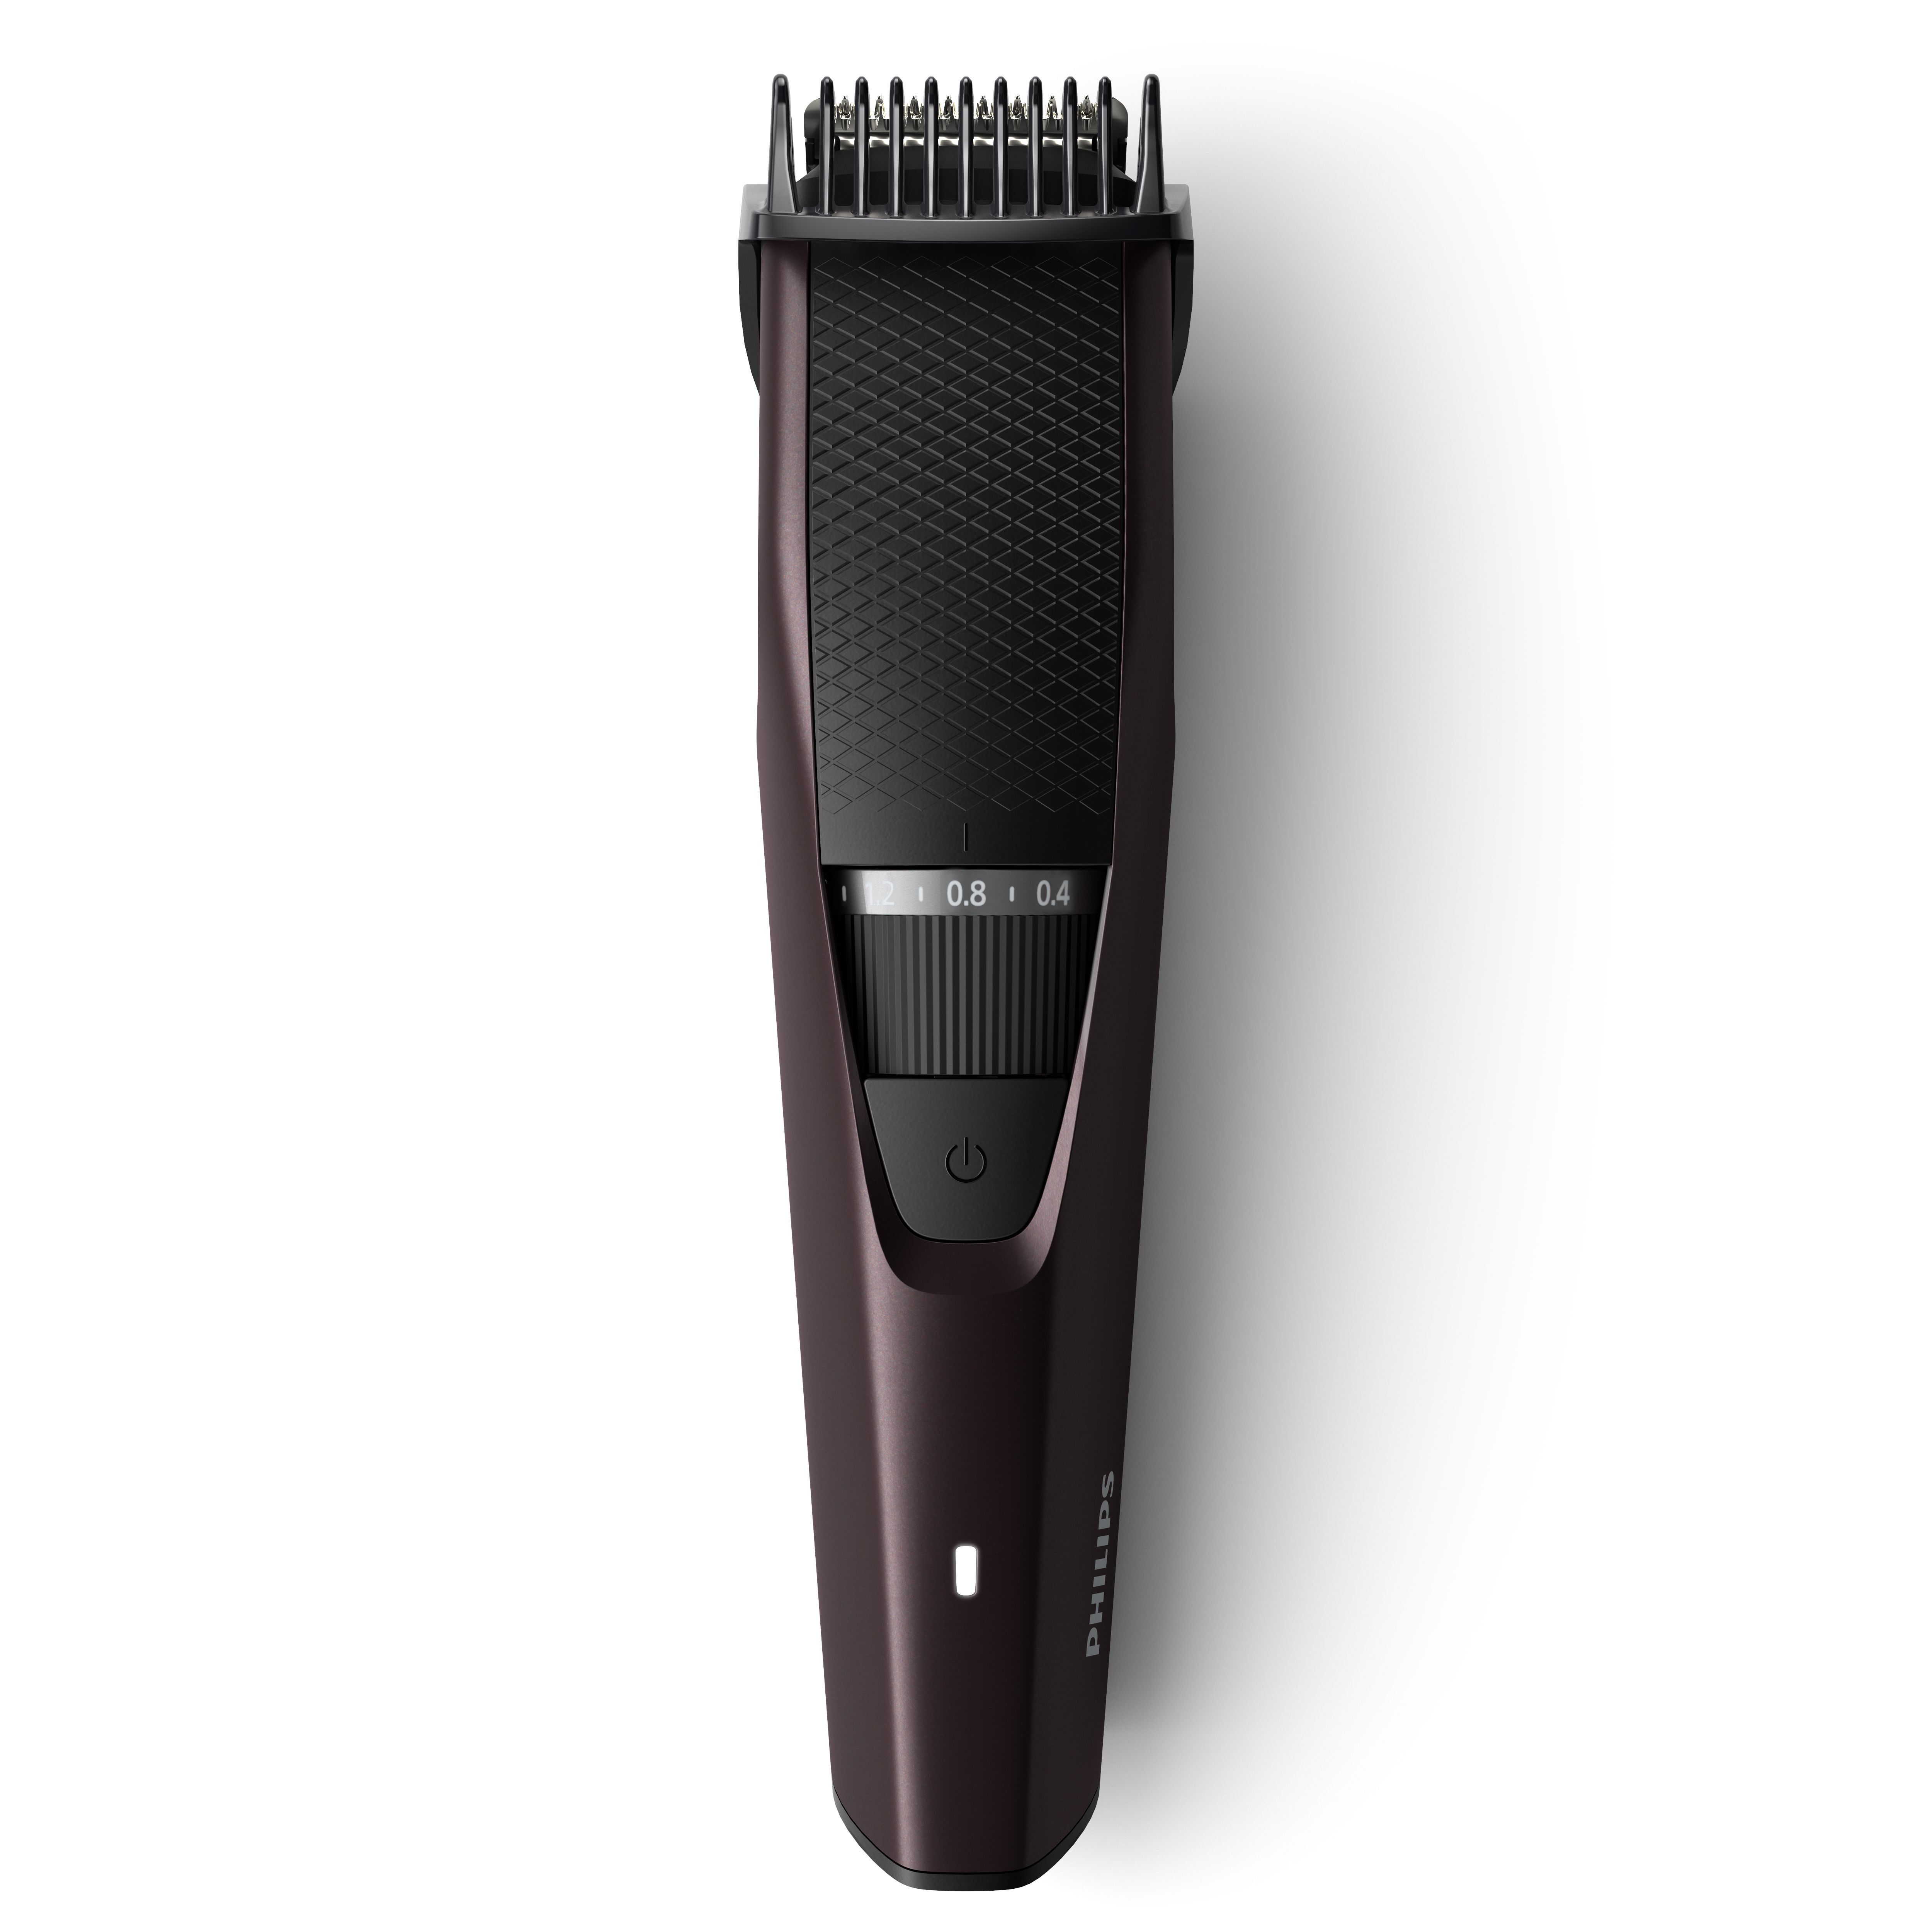 Buy Philips Beard Trimmer With 45 Min Runtime and 20 Length